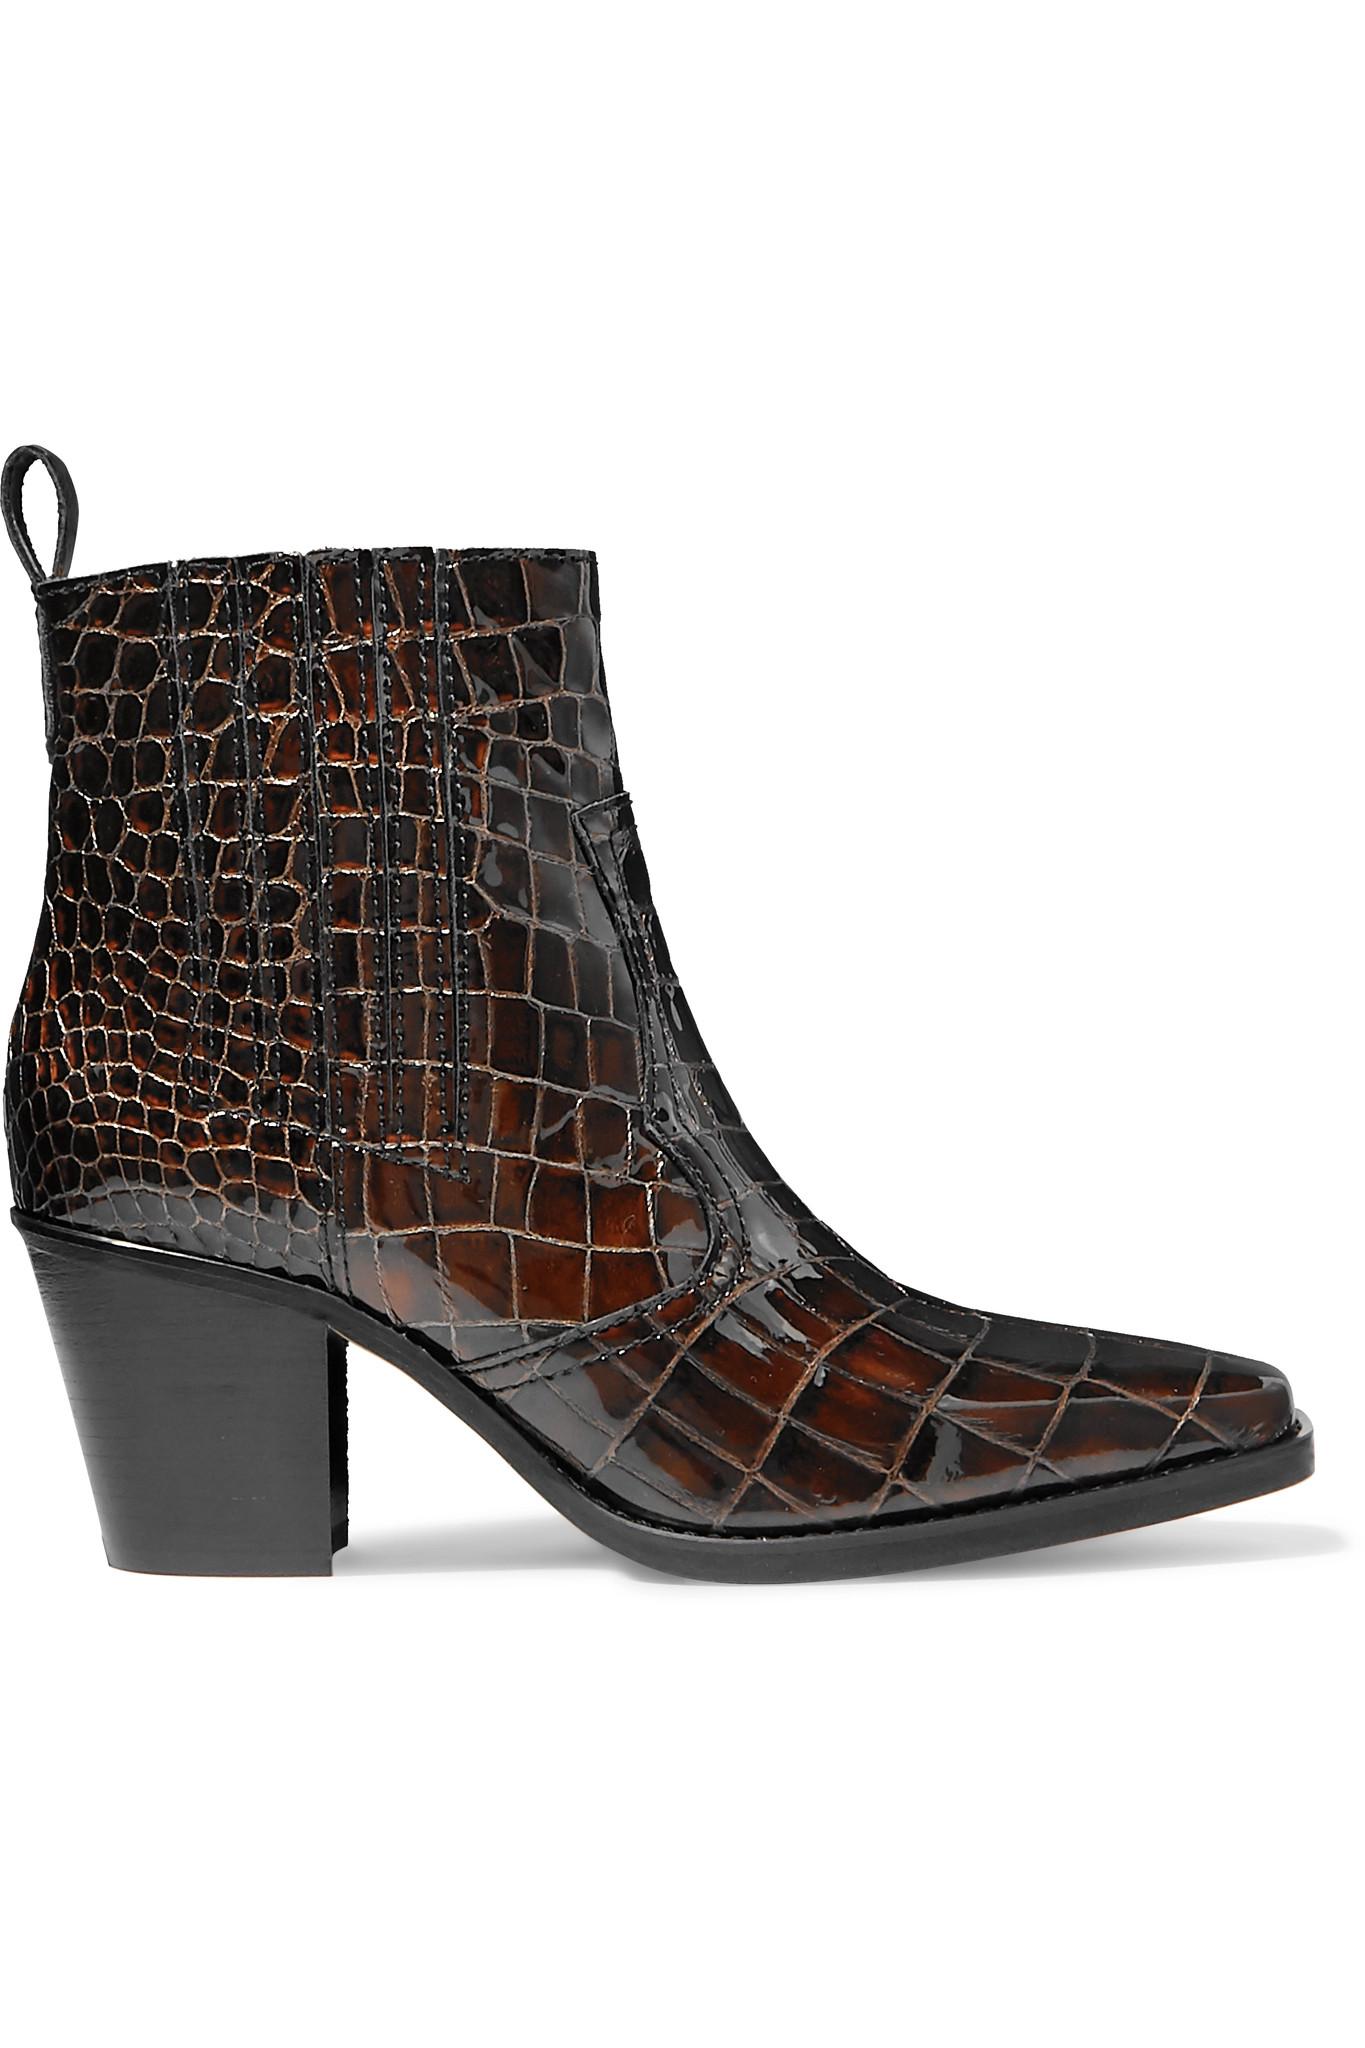 Lyst - Ganni Croc-effect Leather Ankle Boots in Brown